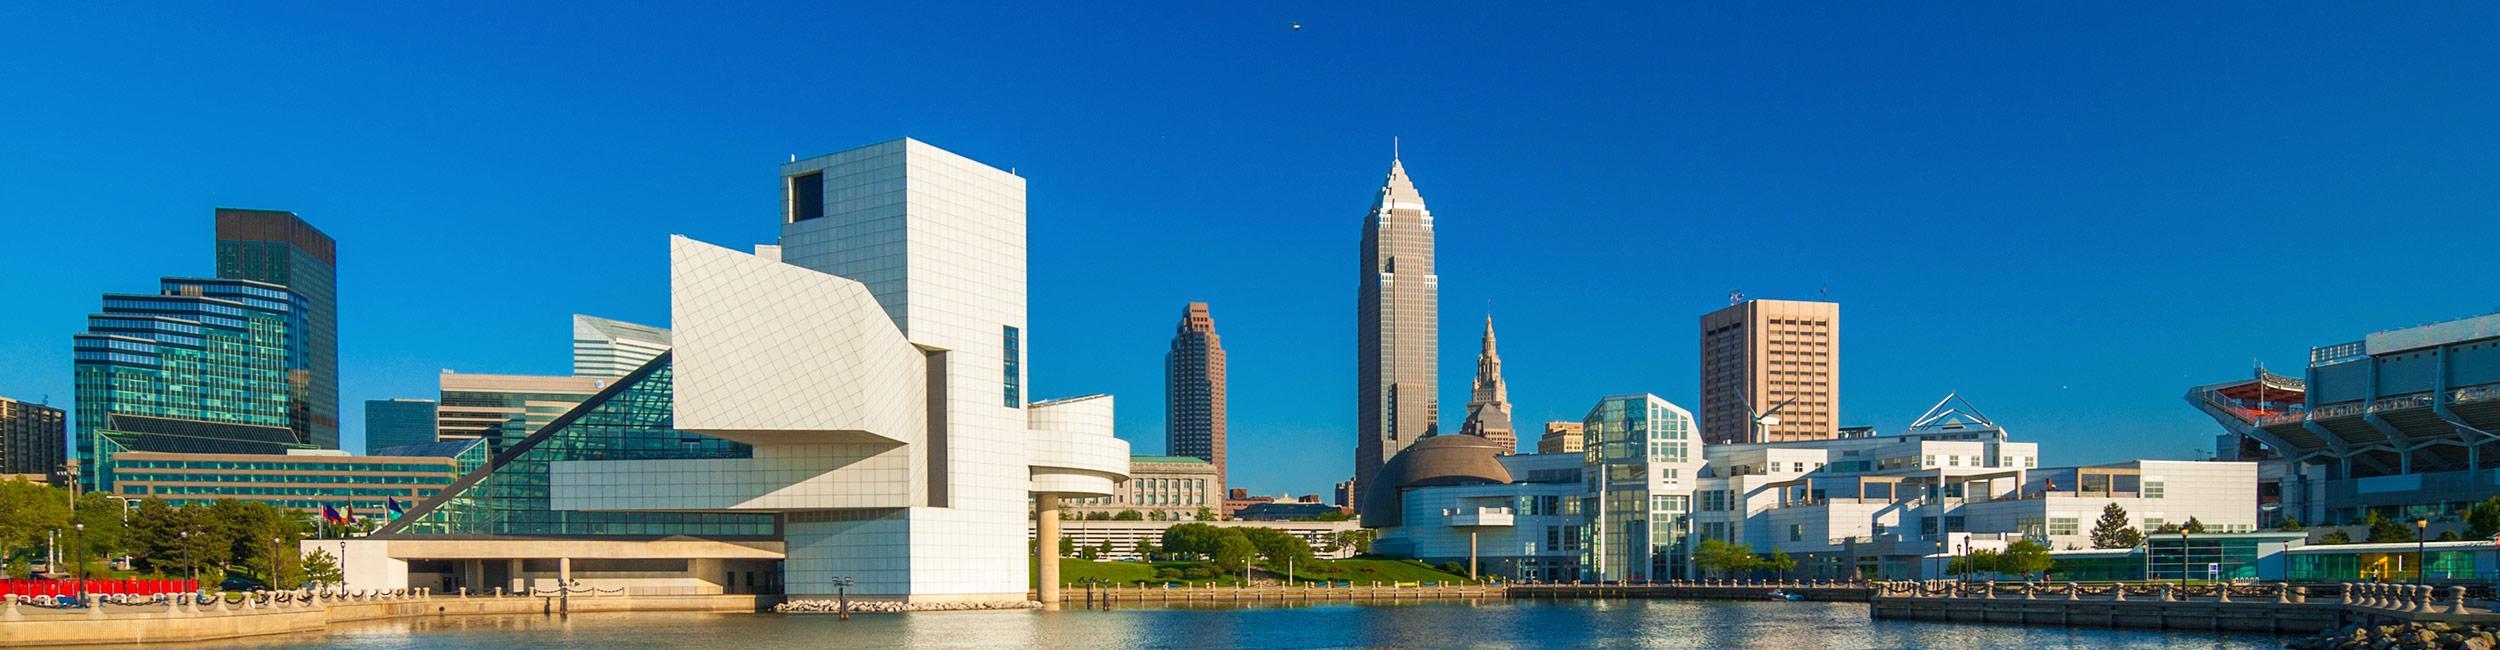 A view of Cleveland taken from Lake Erie